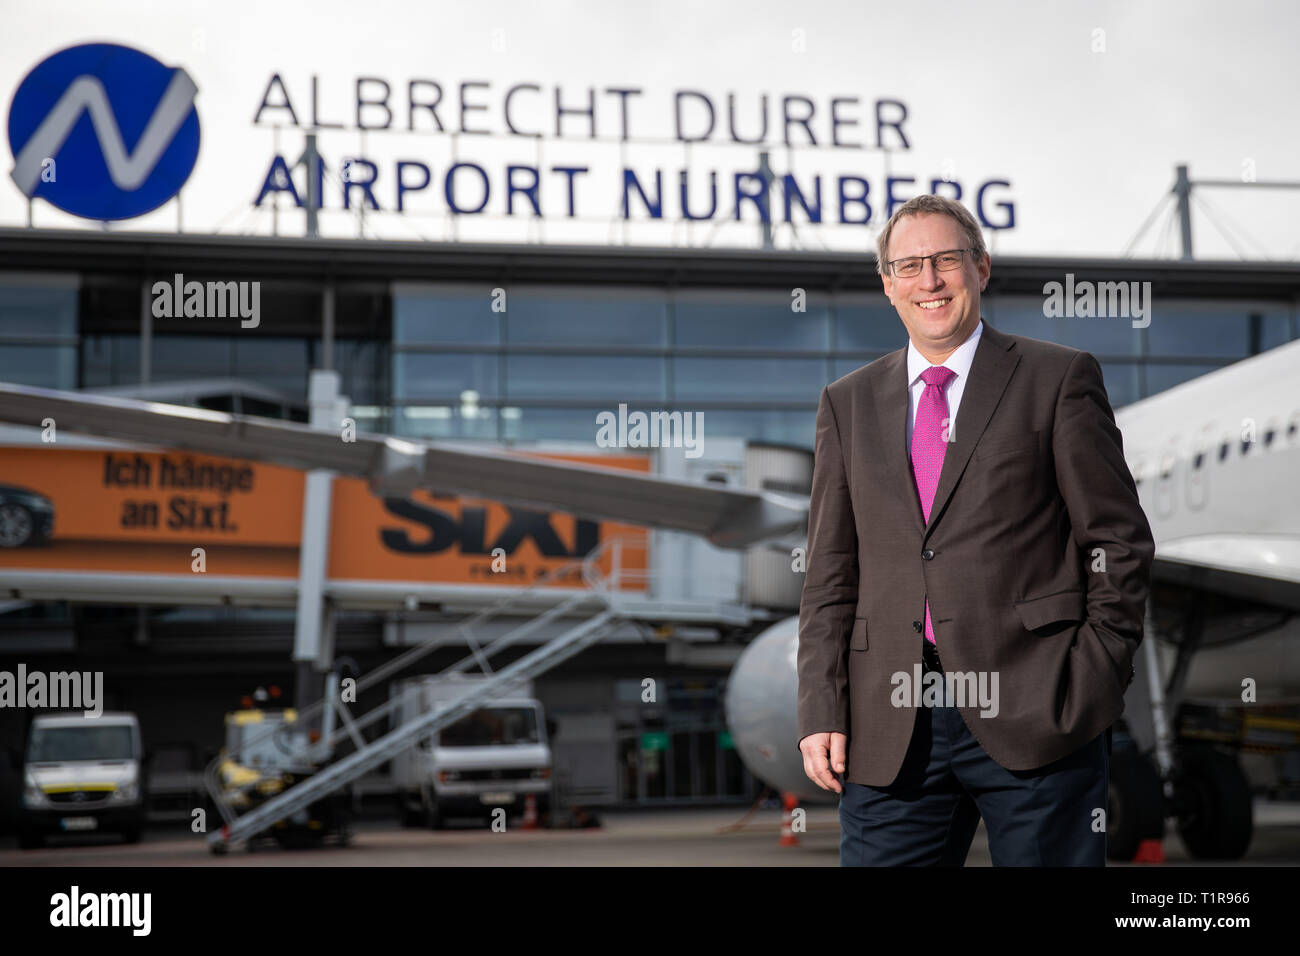 28 March 2019, Bavaria, Nürnberg: Michael Hupe, Managing Director of Albrecht Dürer Airport Nuremberg, stands on the edge of the annual parking lot on the apron in front of the company's logo. Photo: Daniel Karmann/dpa Stock Photo